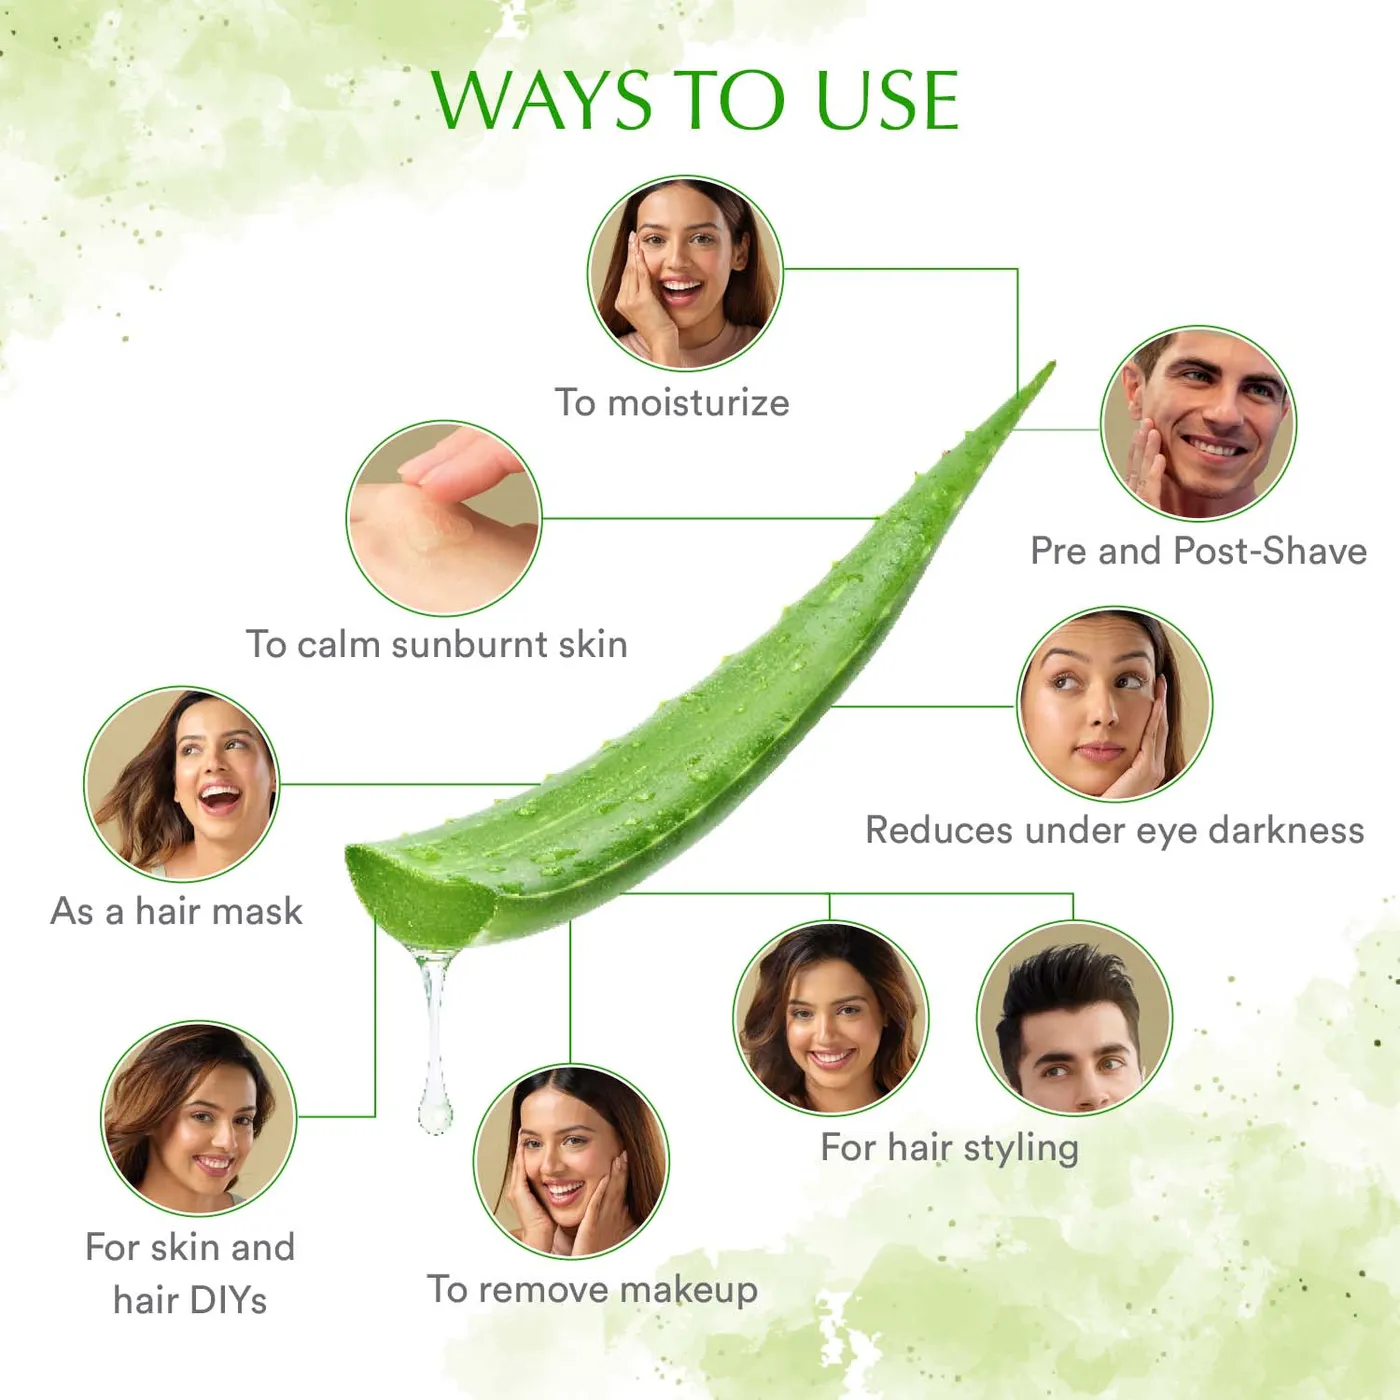 How To Use Aloe Vera Gel? Benefits & How to Apply